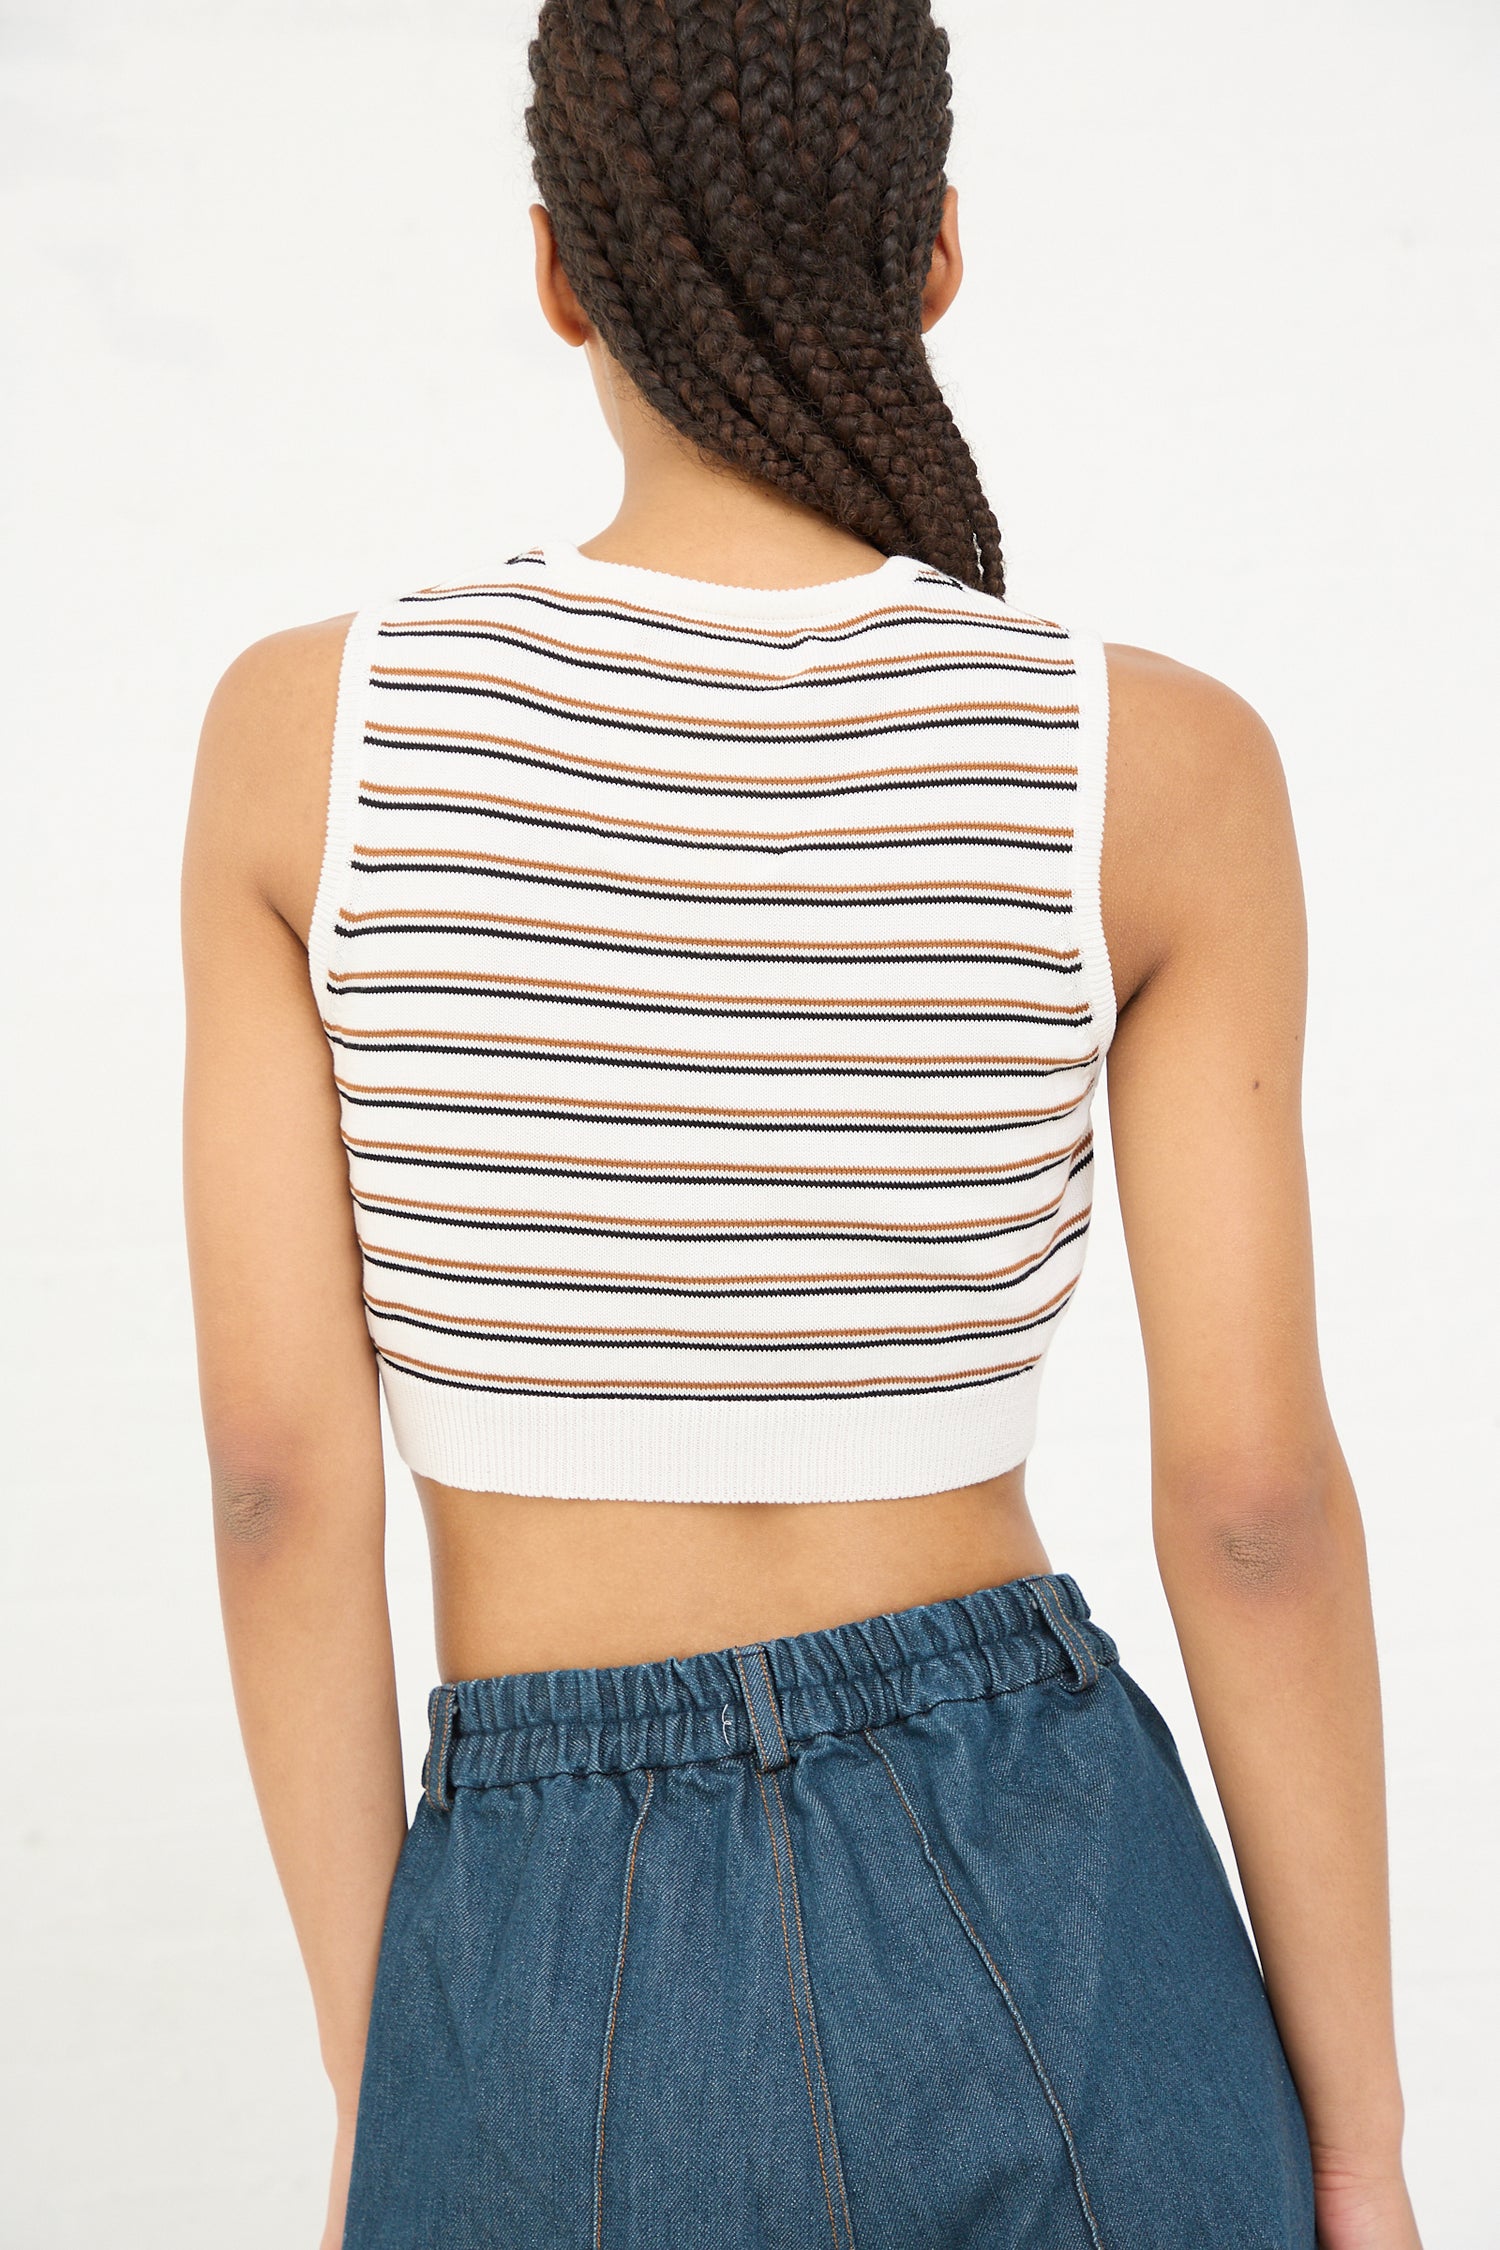 Woman seen from behind wearing a Cordera organic cotton striped crop top with a braid hairstyle.